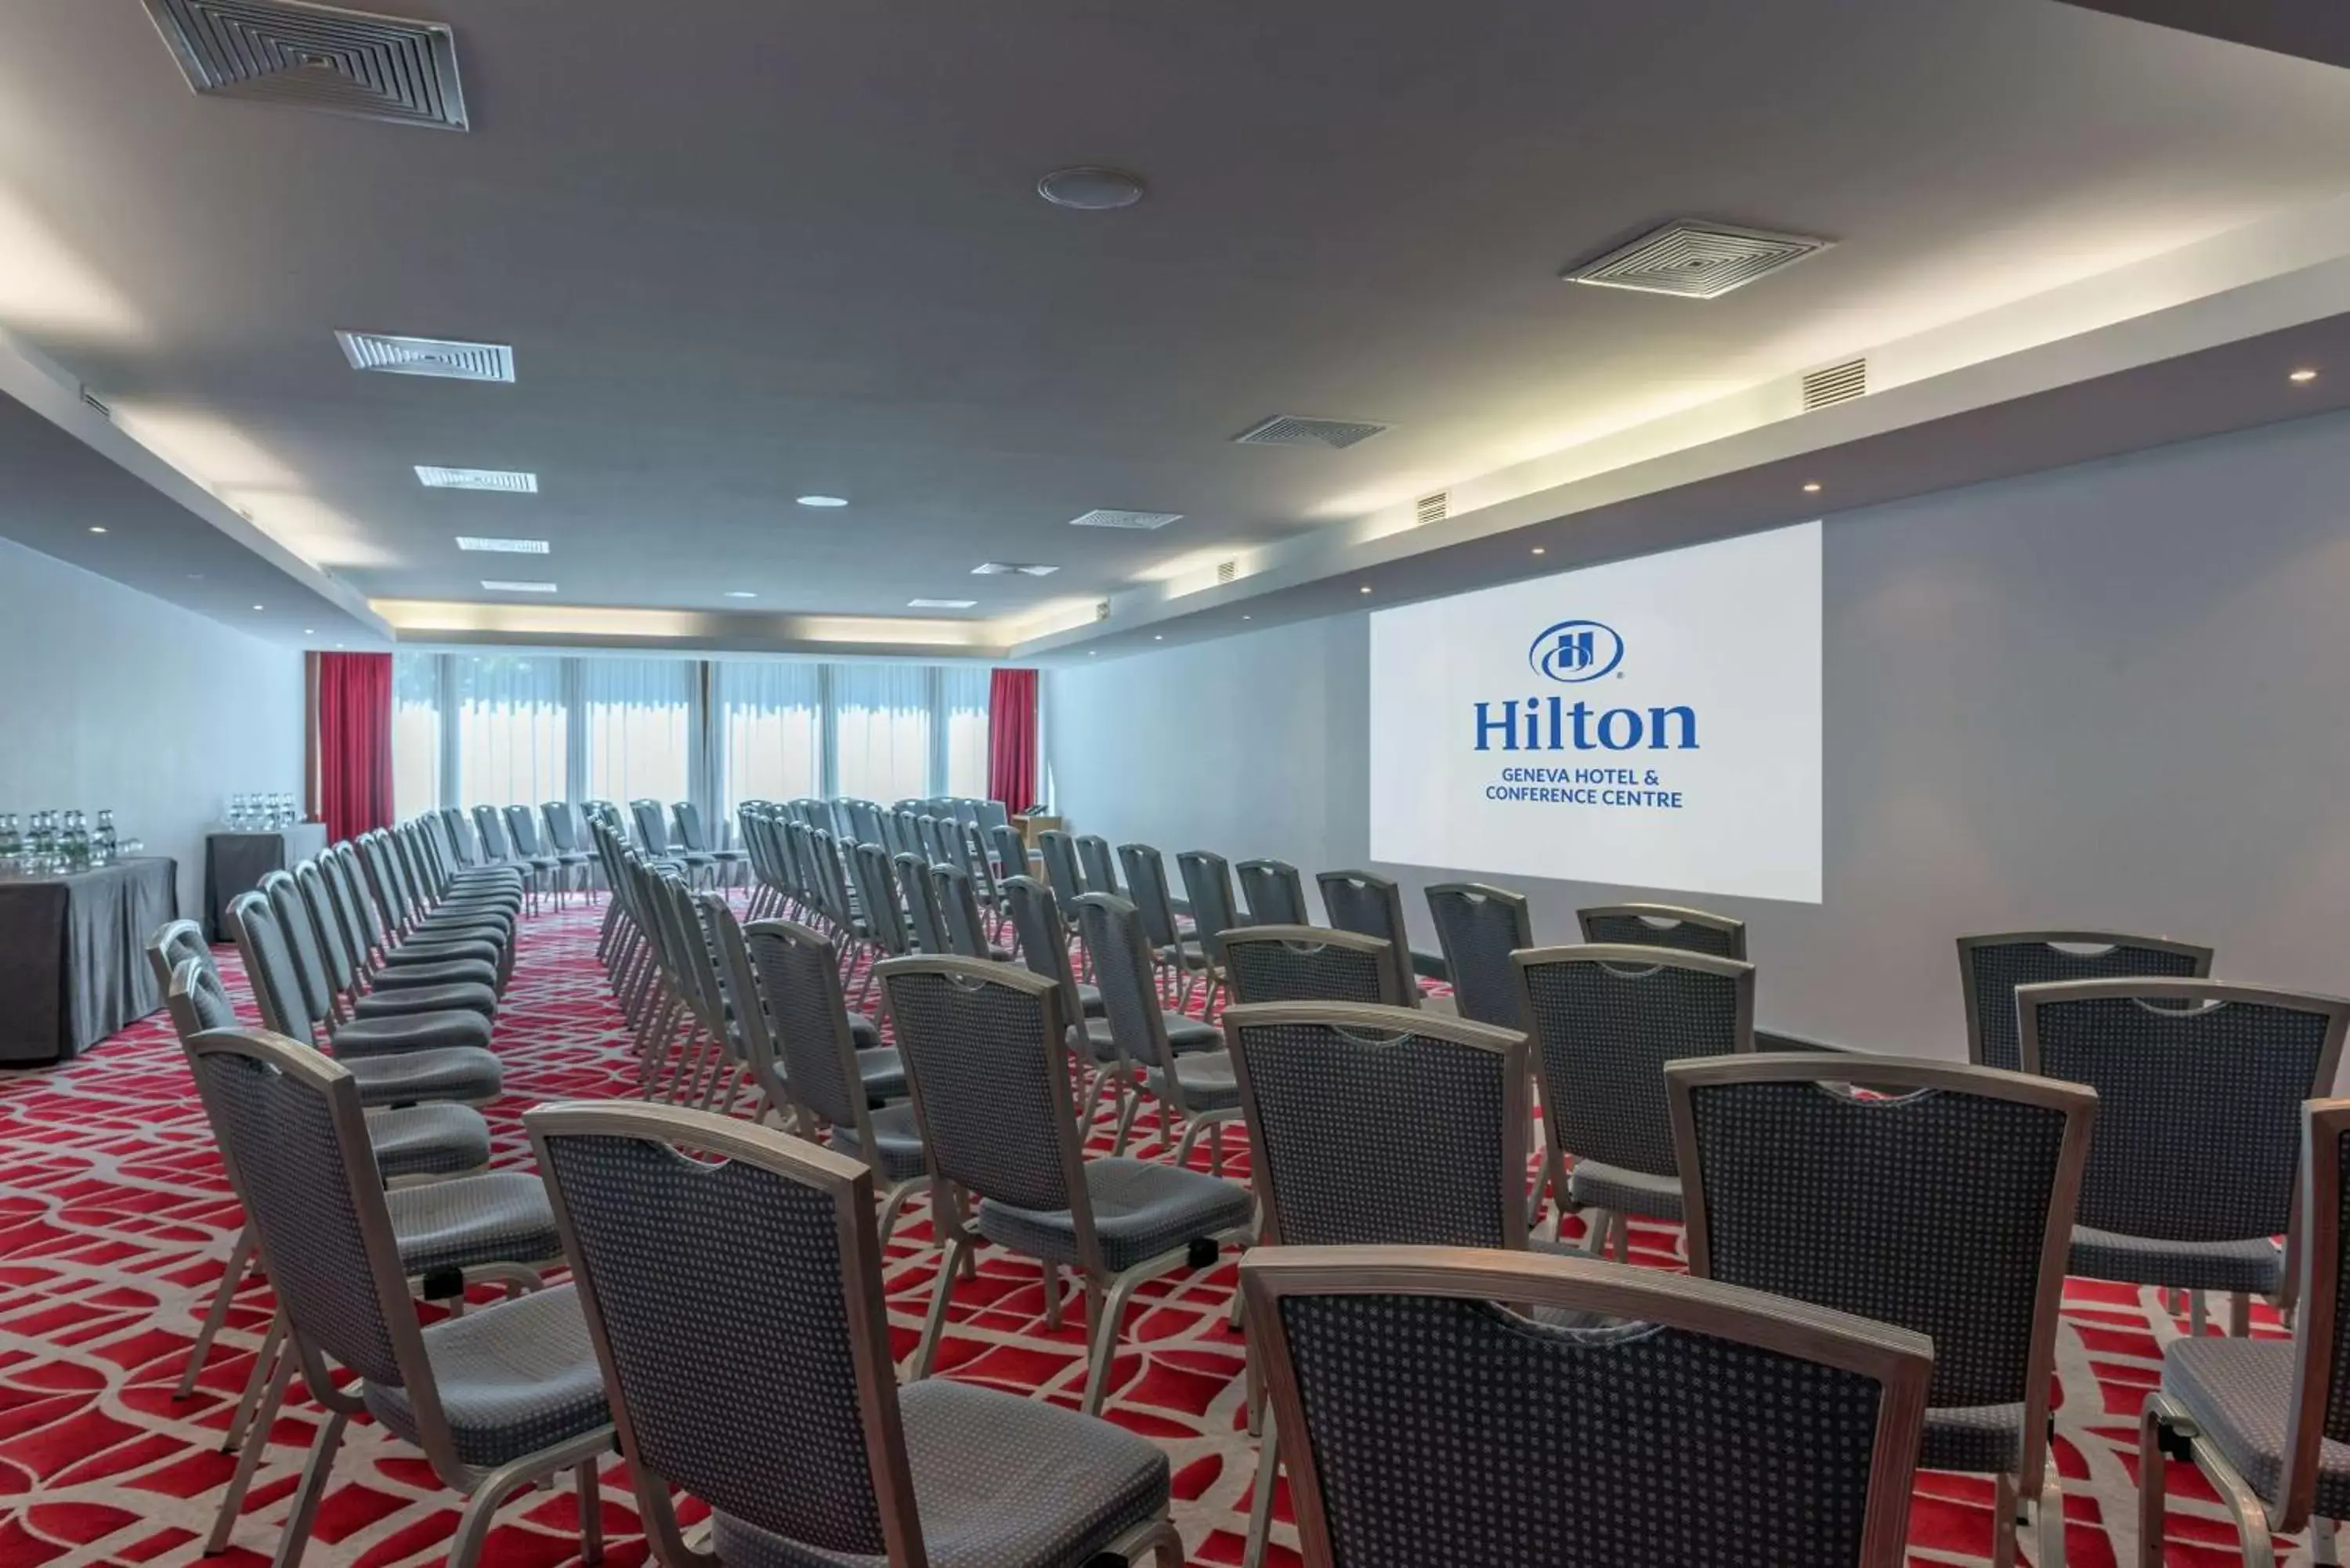 Meeting/conference room in Hilton Geneva Hotel and Conference Centre